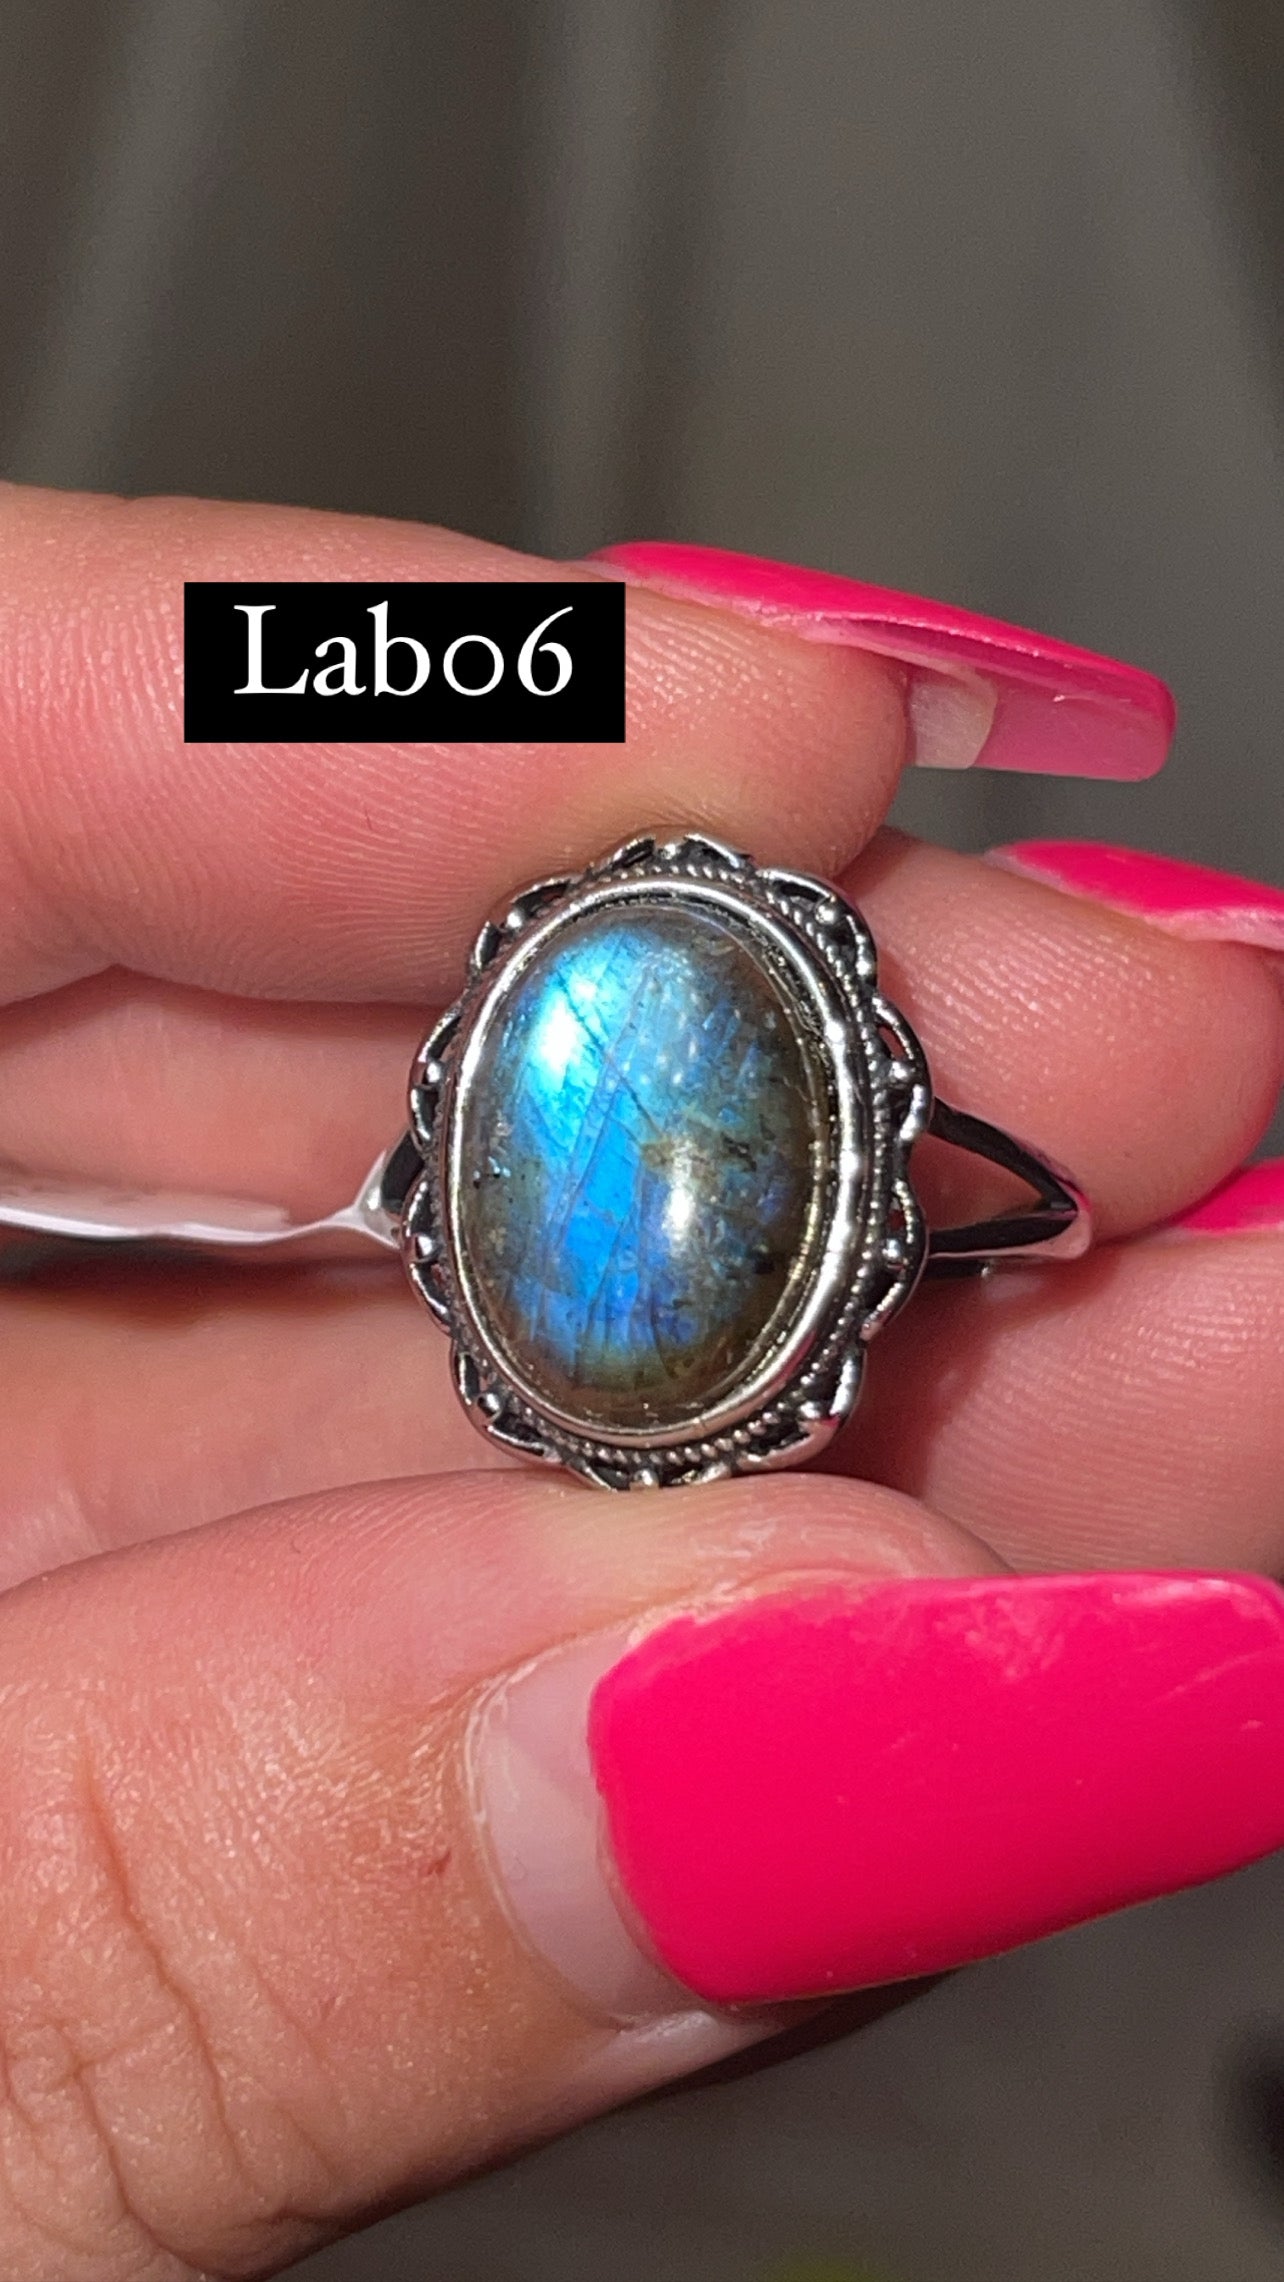 Labradorite 925 Sterling Silver Adjustable Ring (Choose Your Own)